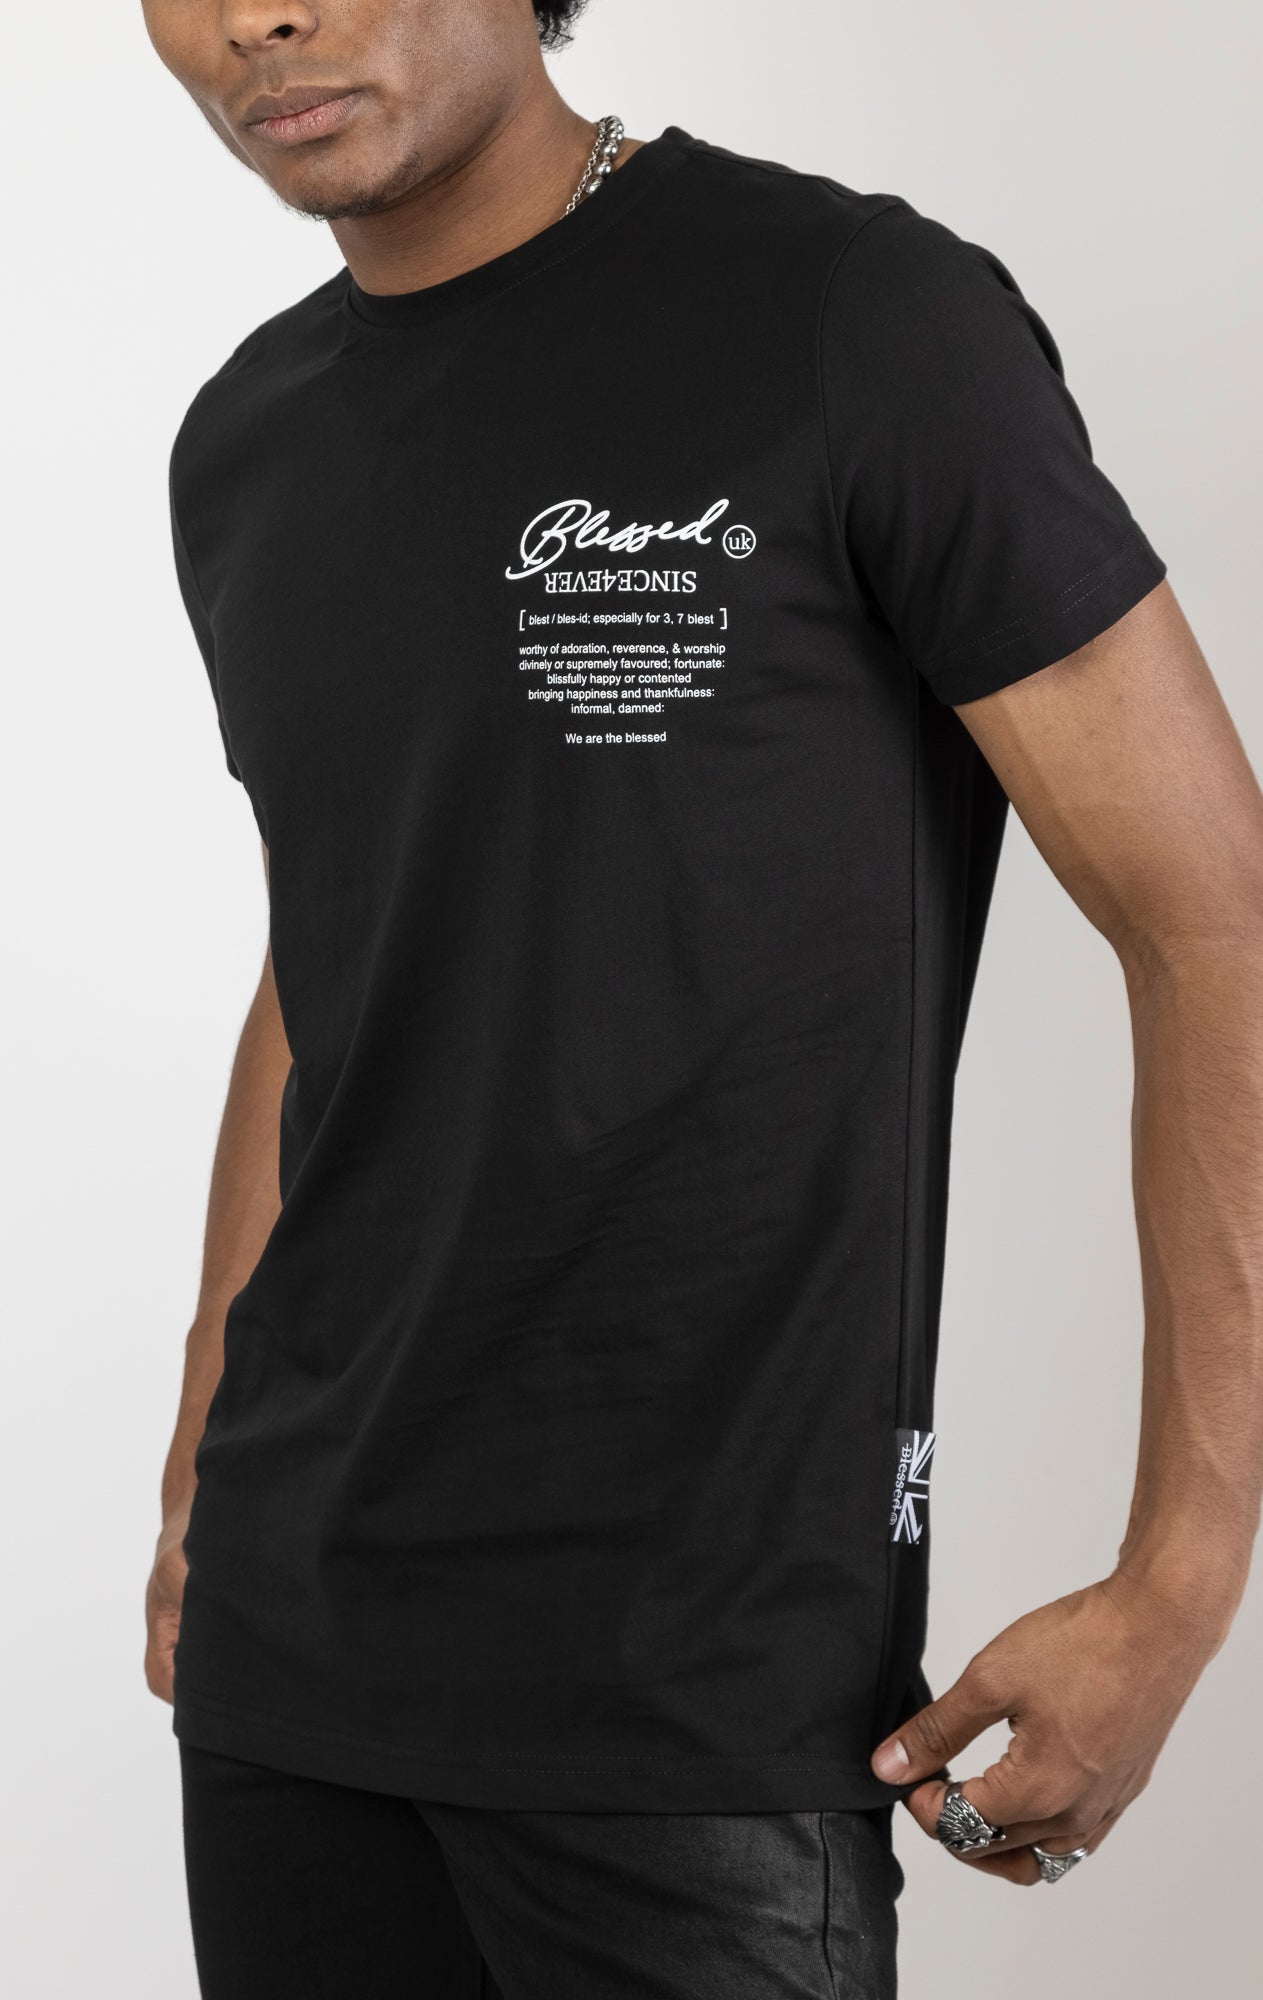 Men's regular fit t-shirt in black. The shirt features a slightly elongated sleeve, a fitted neckline, and a straight body. It has a 